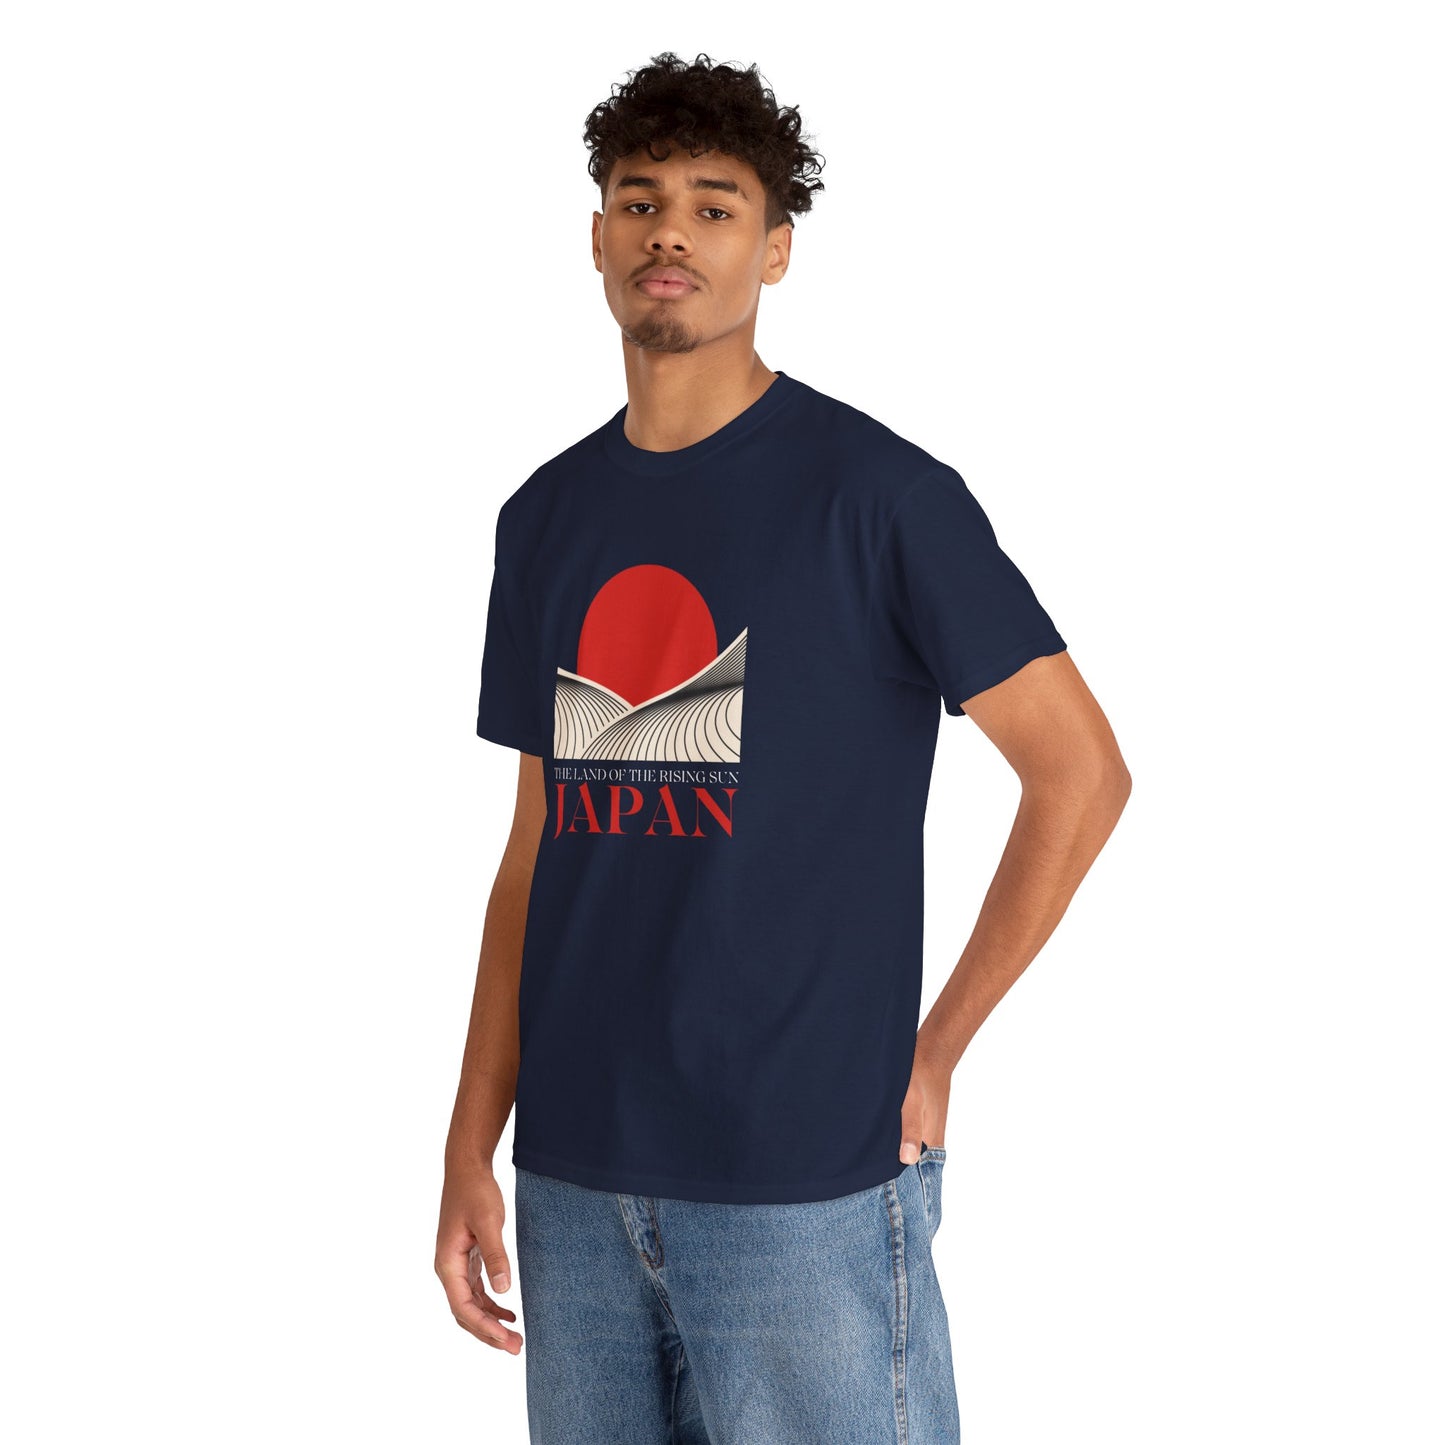 Illustration T-shirt featuring the Rising Sun of Japan - Unisex Heavy Cotton Tee, Ideal for Travelers